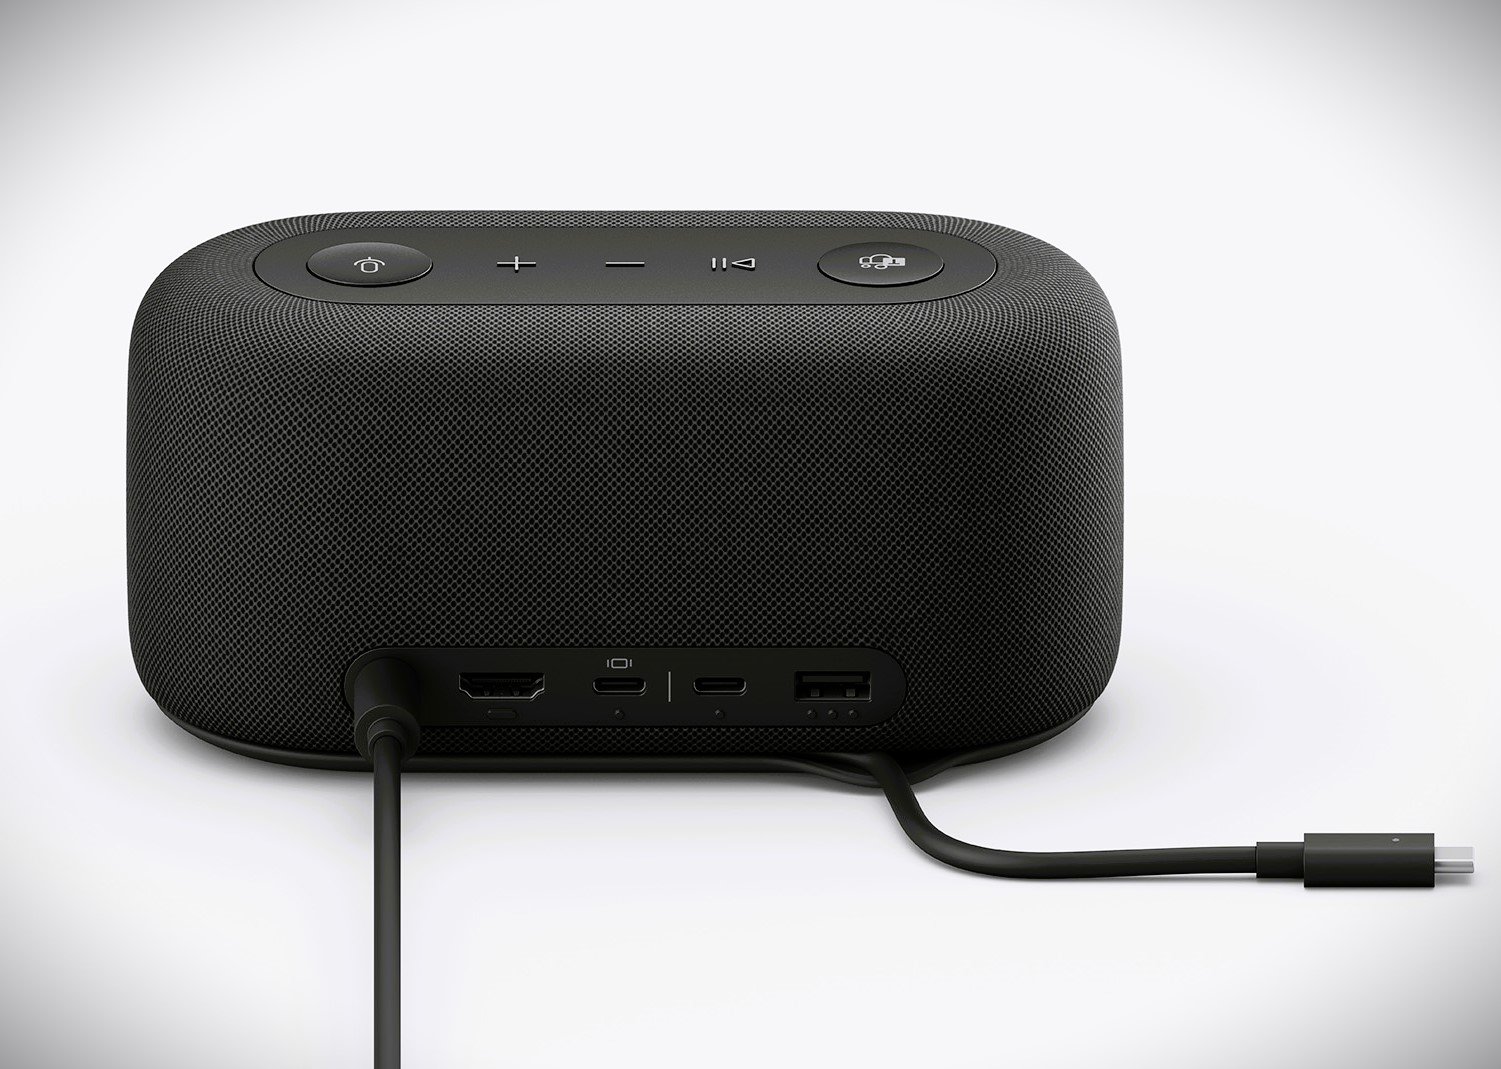 The Microsoft Audio Dock, Presenter+ are your unusual Surface objects